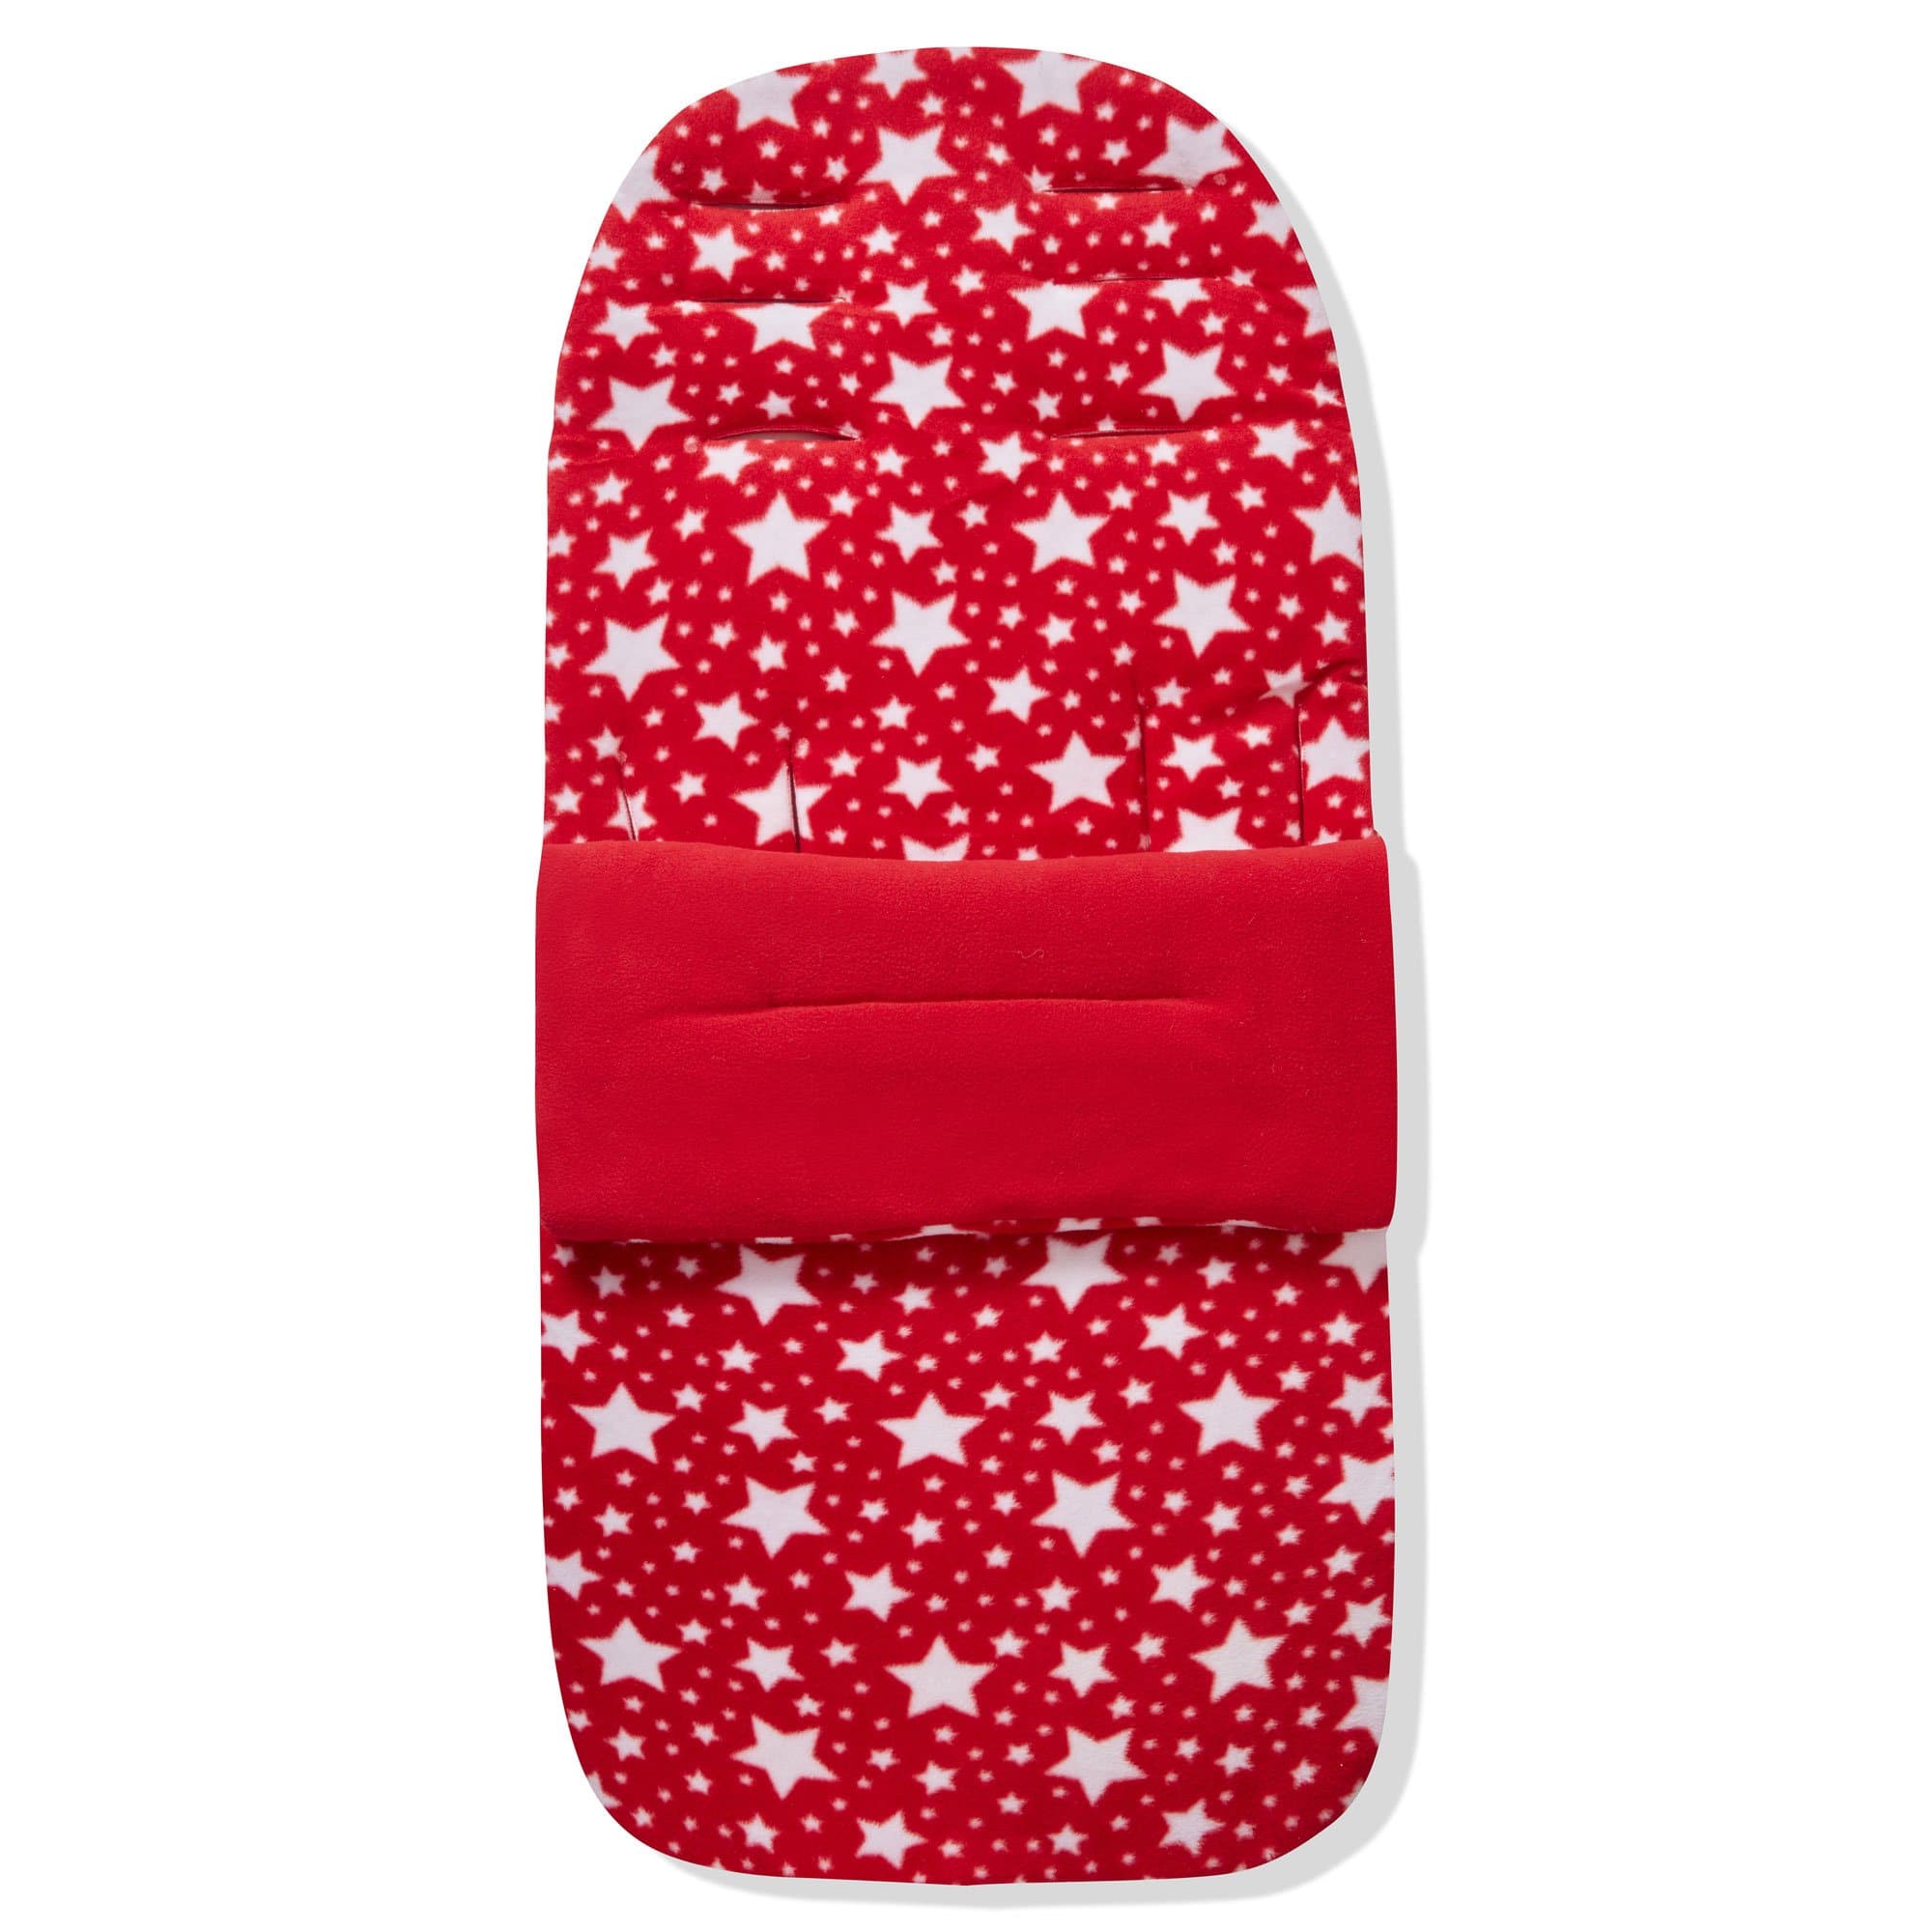 Fleece Footmuff / Cosy Toes Compatible with Little Shield - Red Star / Fits All Models | For Your Little One